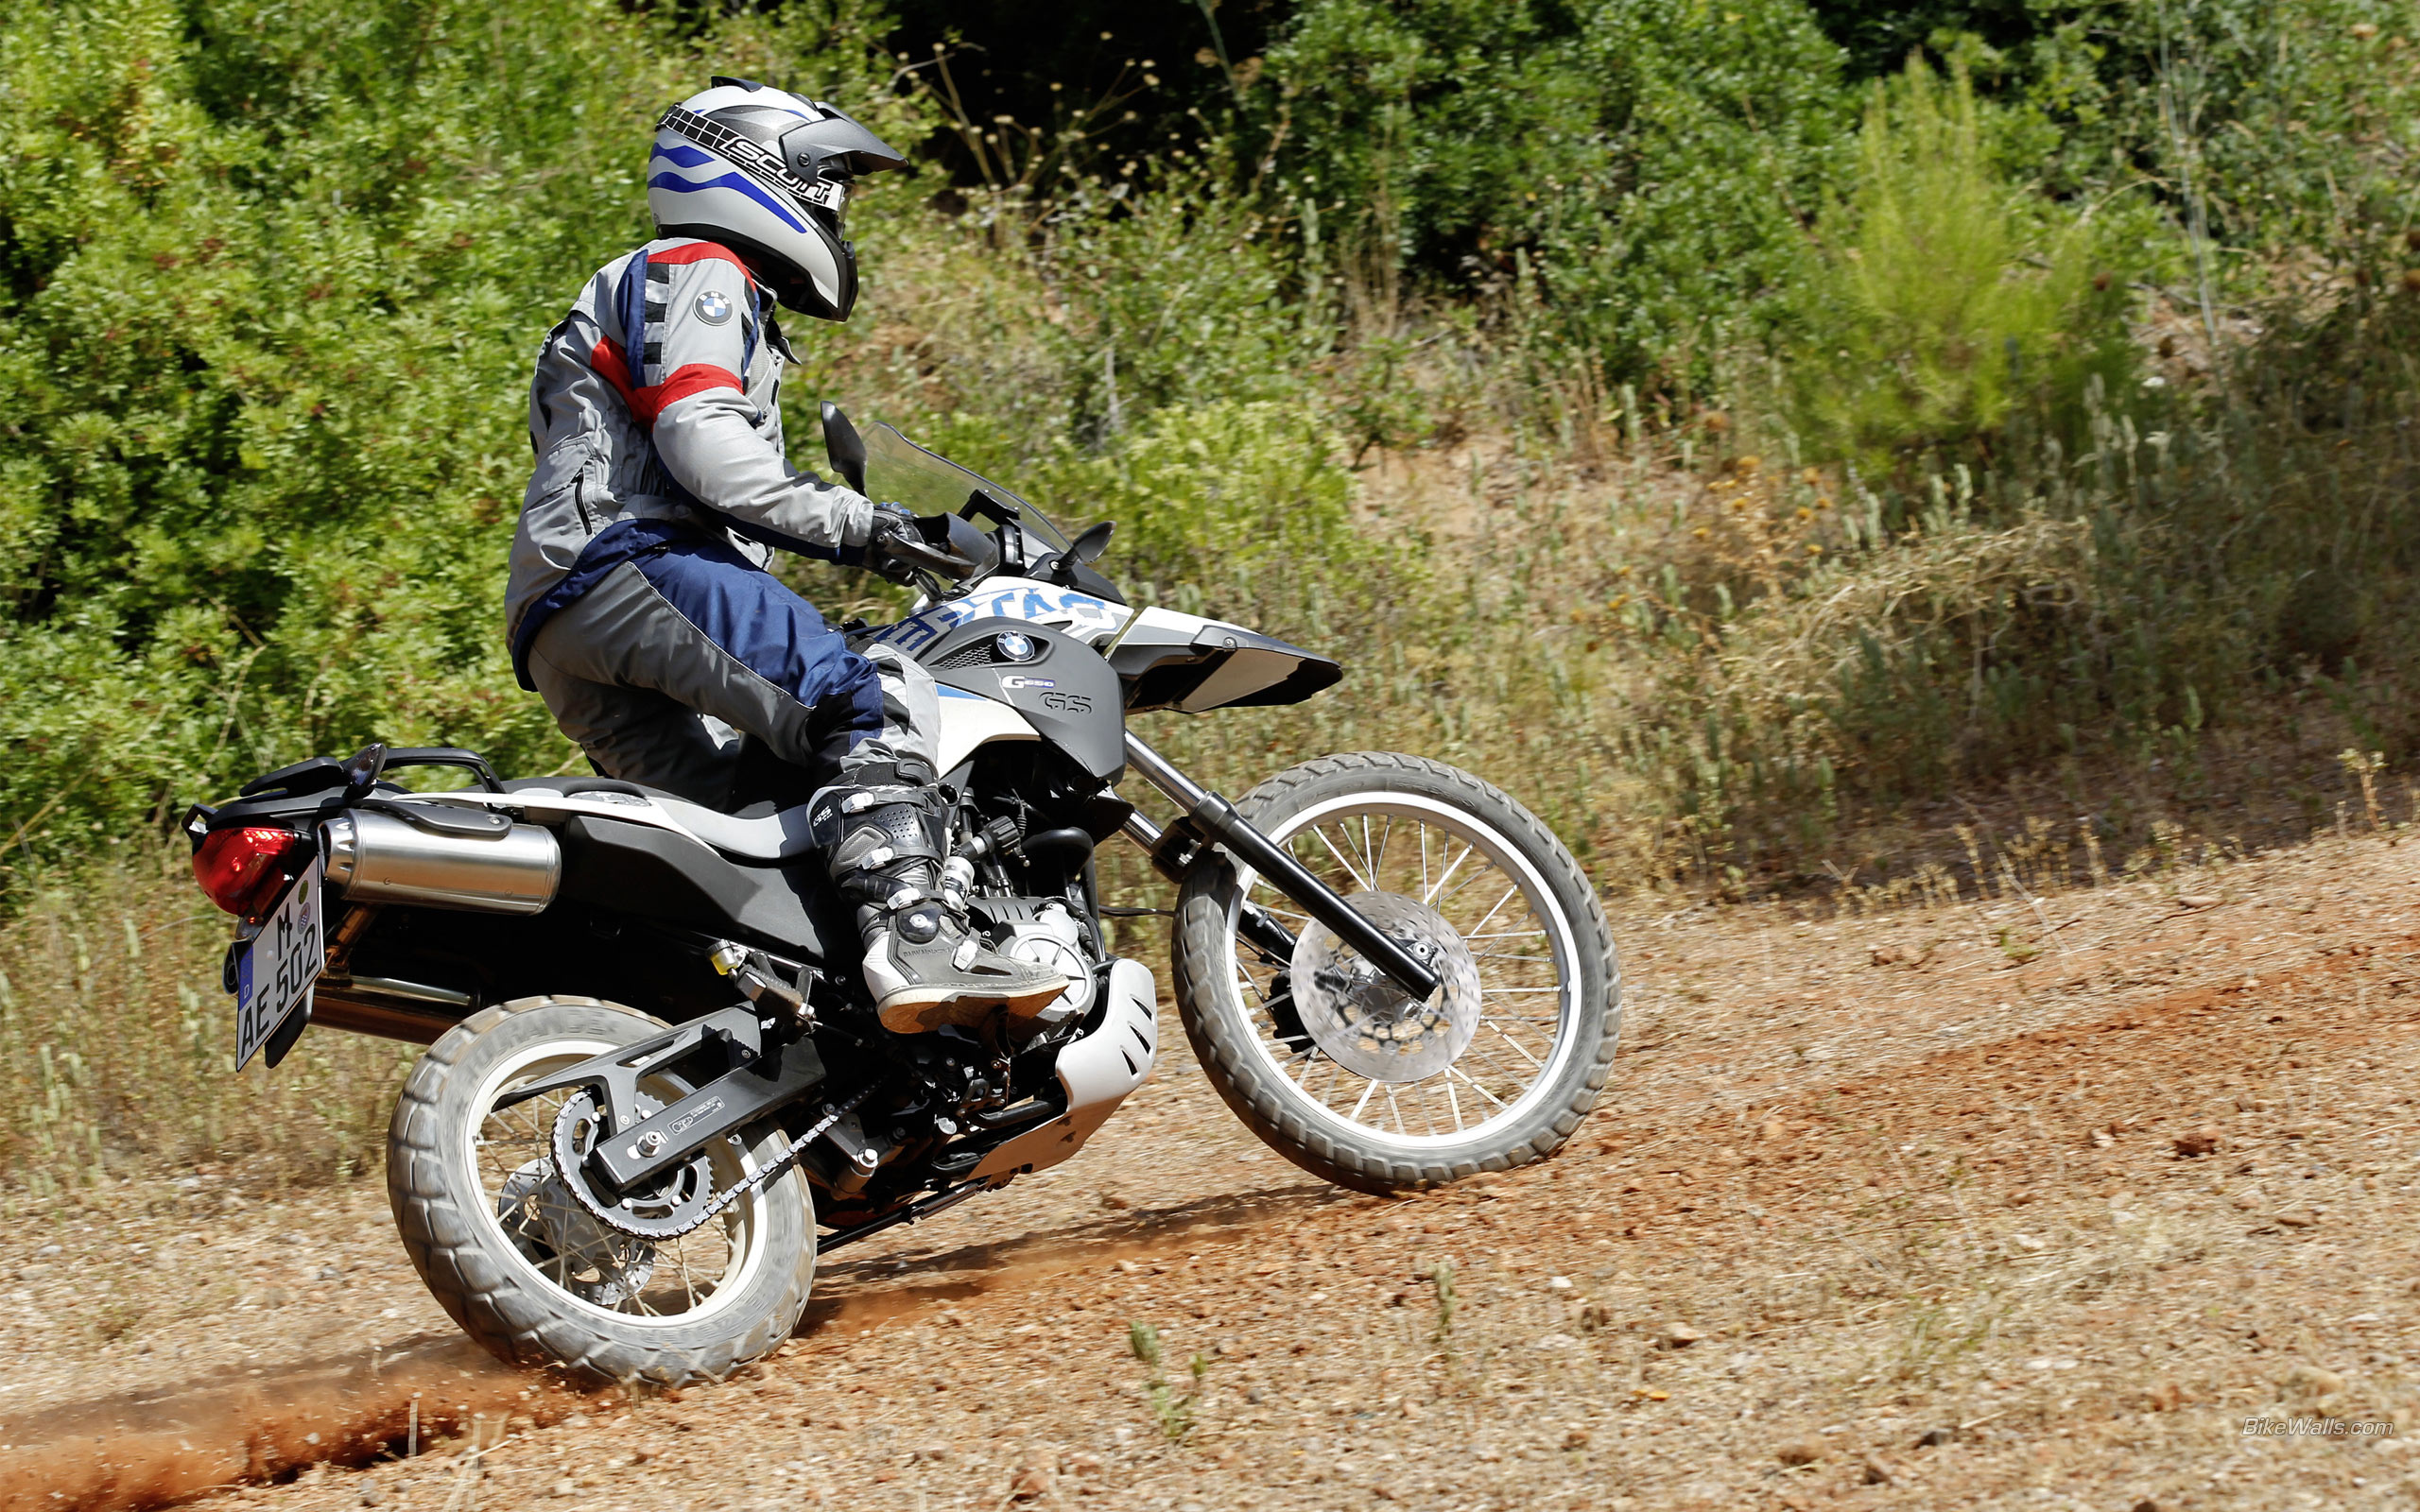 Enduro Motorbike: BMW, Amateur Motor Racing, Wide Back Tire Support More Grip On Loose Roads Surfaces. 2560x1600 HD Background.